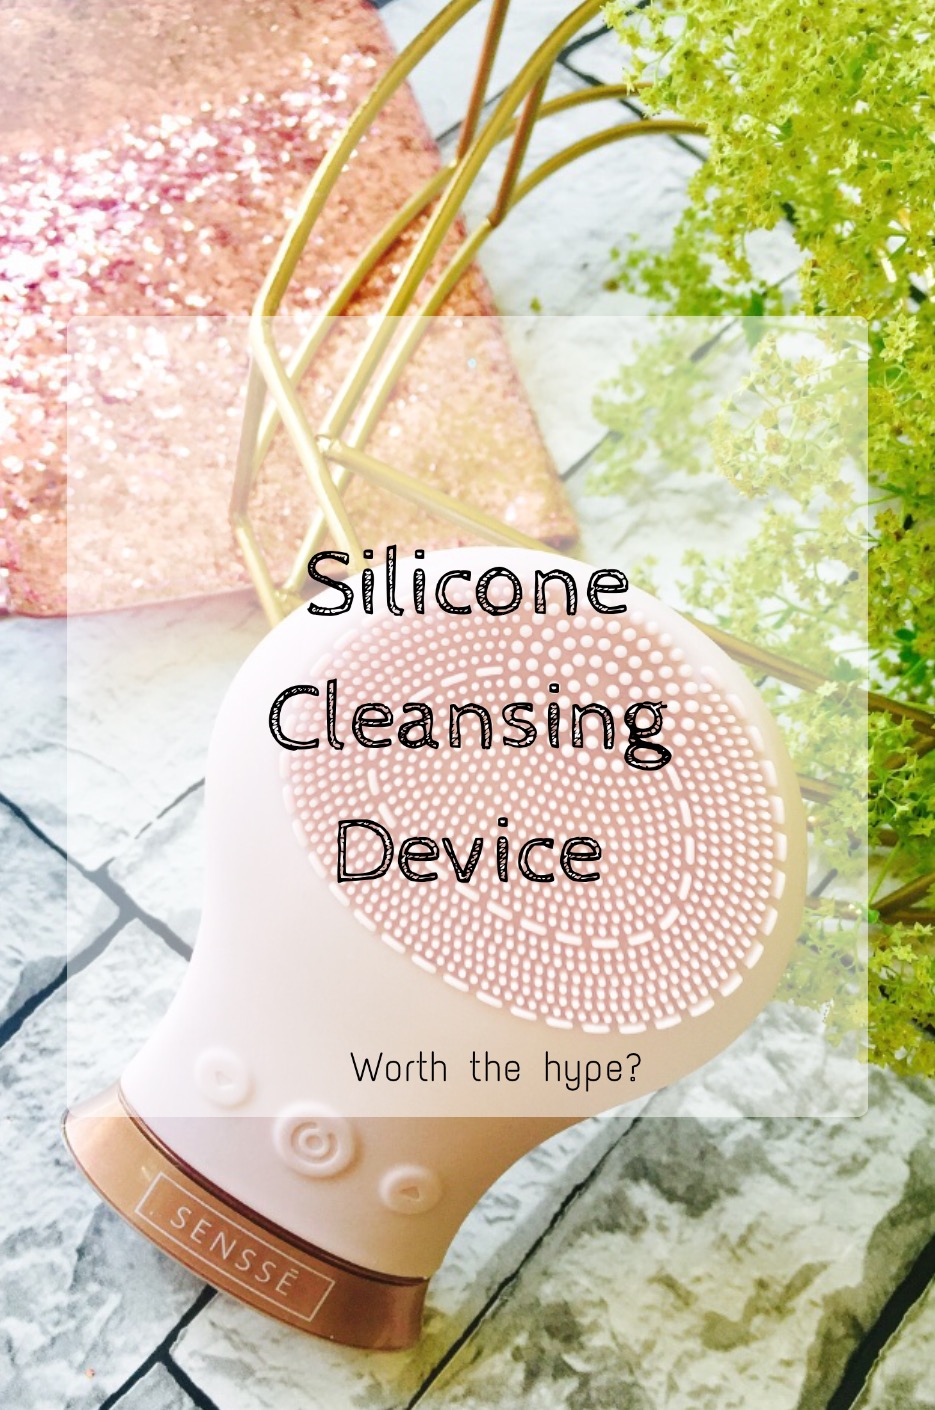 Sensse silicone cleansing device